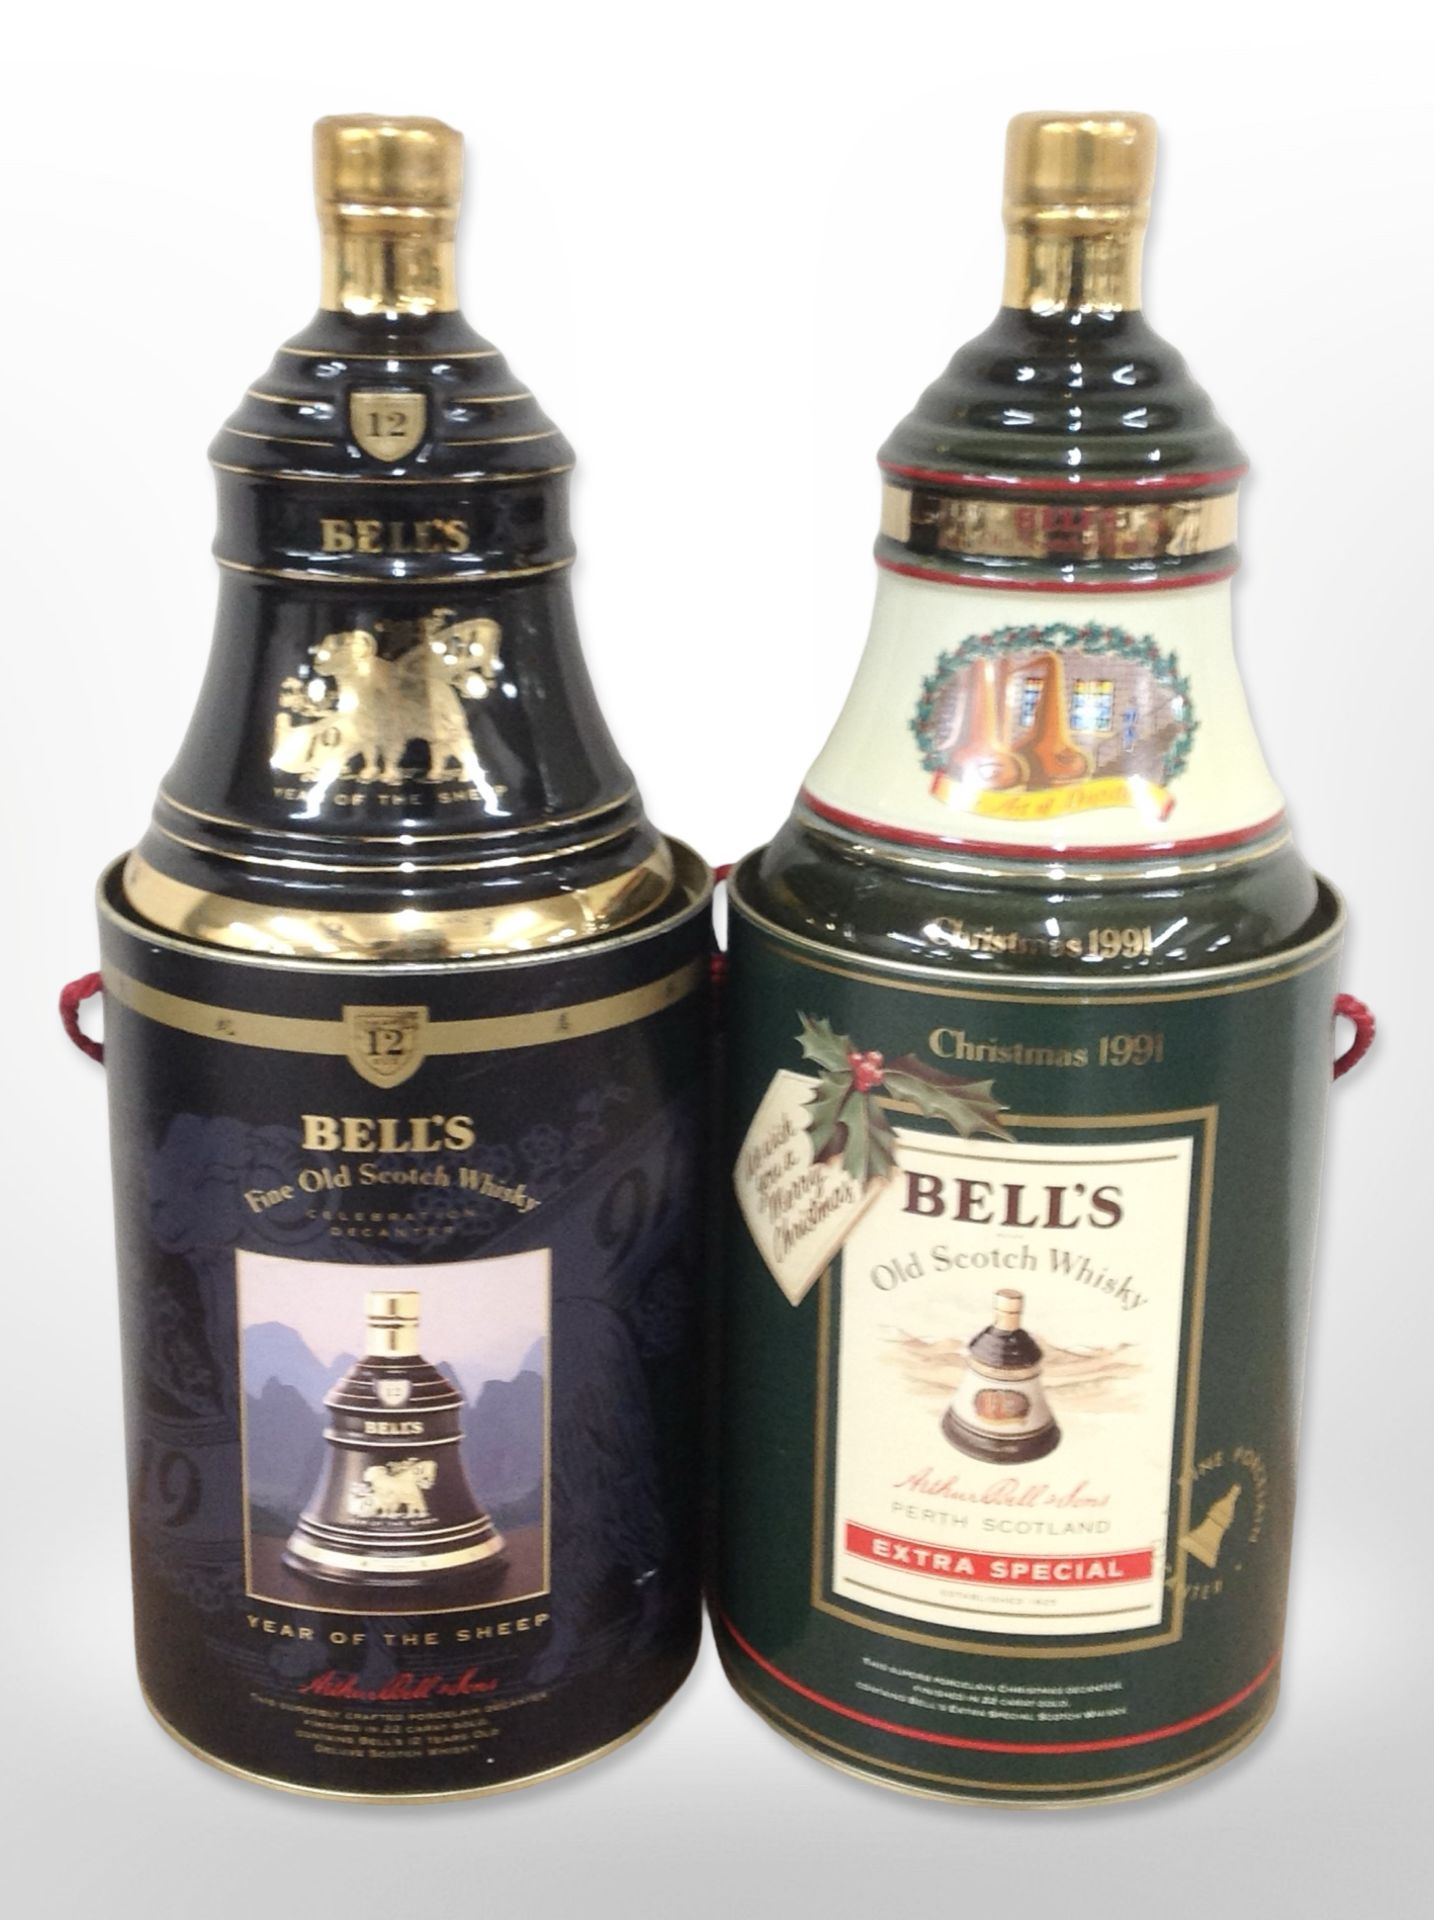 Two Bell's Old Scotch Whisky 1991 decanters, Christmas and Year of the Sheep,